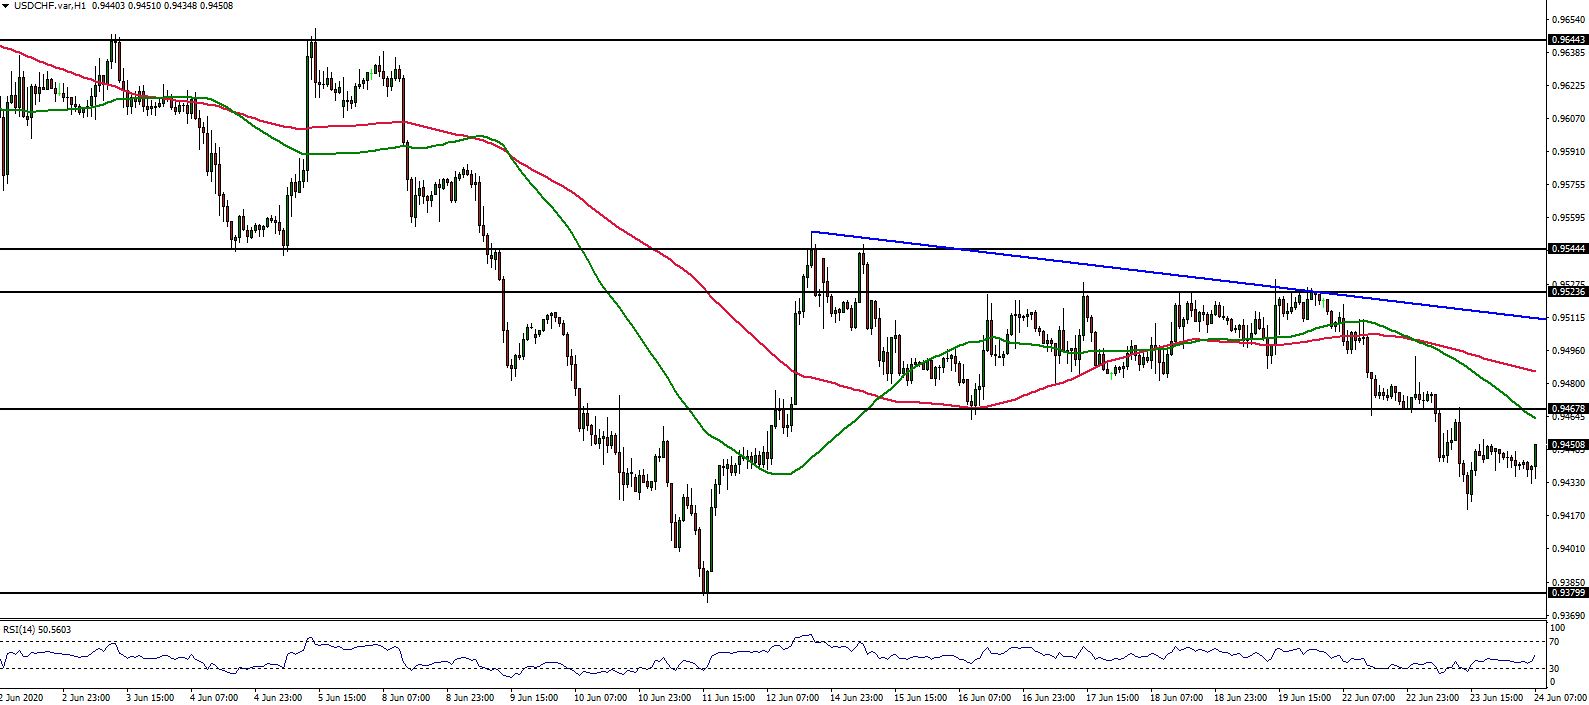 TriumphFX Intraday Forex Analysis 1 Hour Charts June 24, 2020